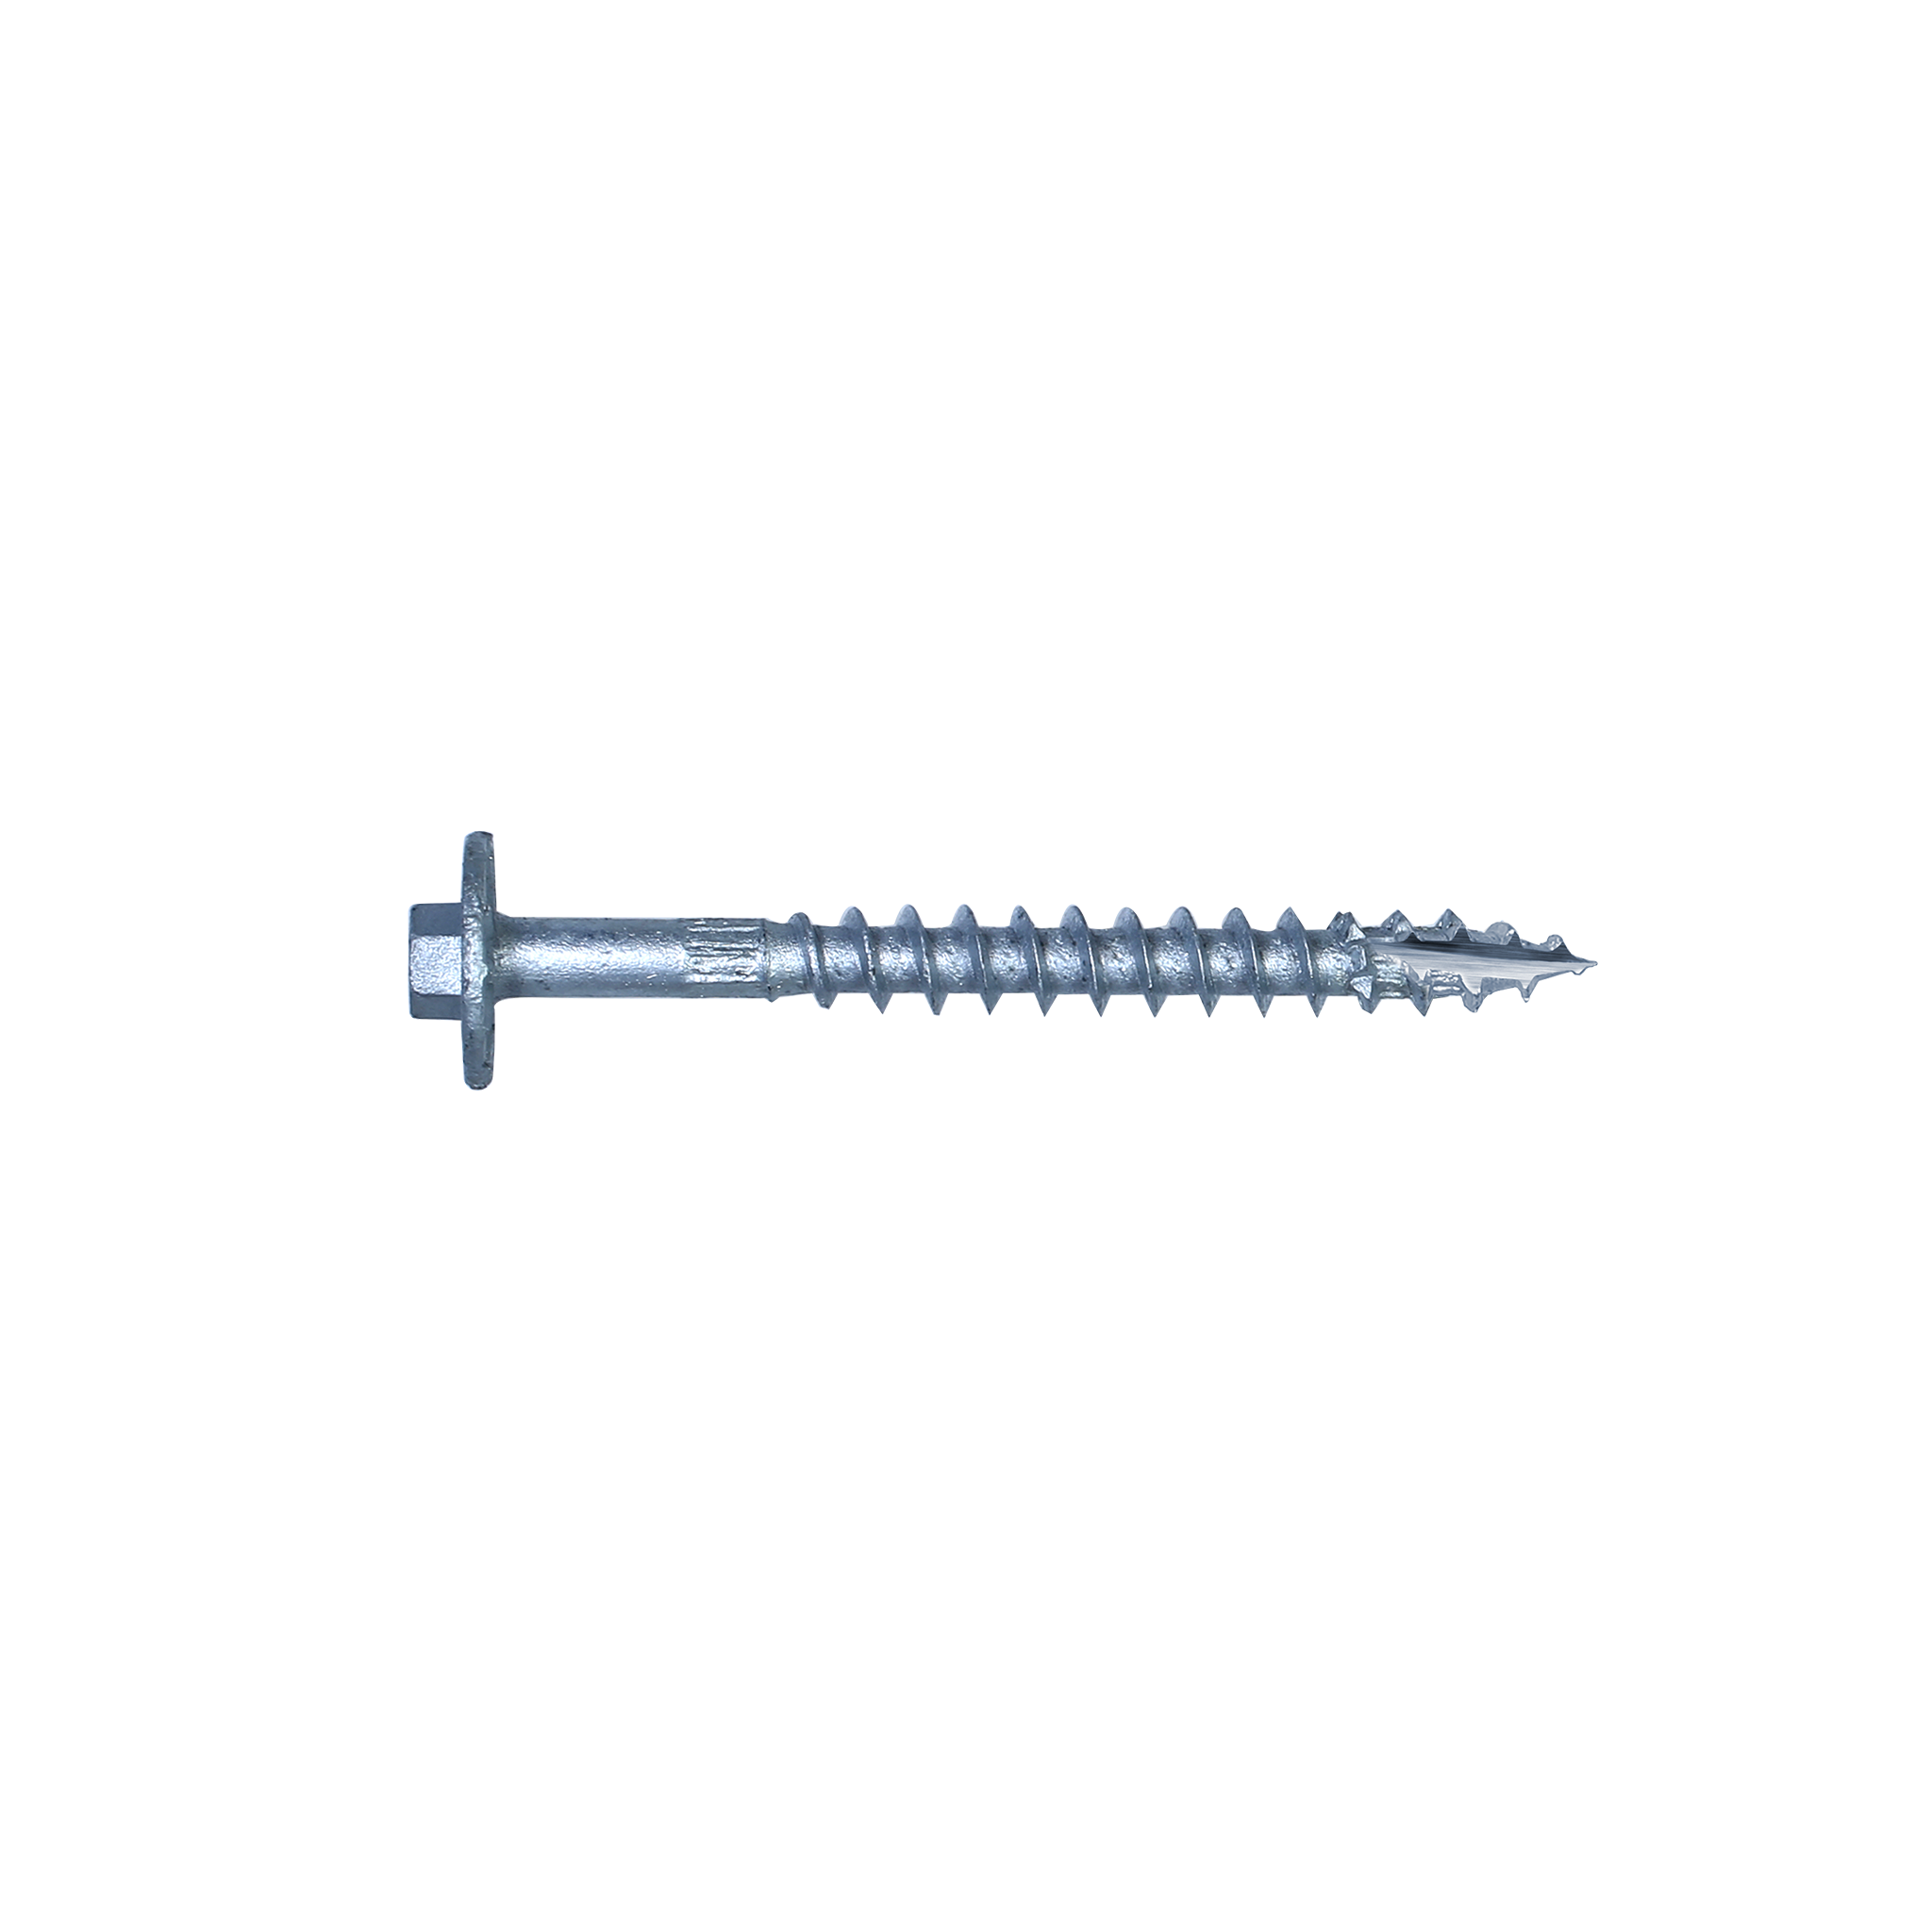 Strong-Drive® SDWH TIMBER-HEX HDG Screw — 0.276 in. x 4 in. 3/8 Hex (350-Qty)